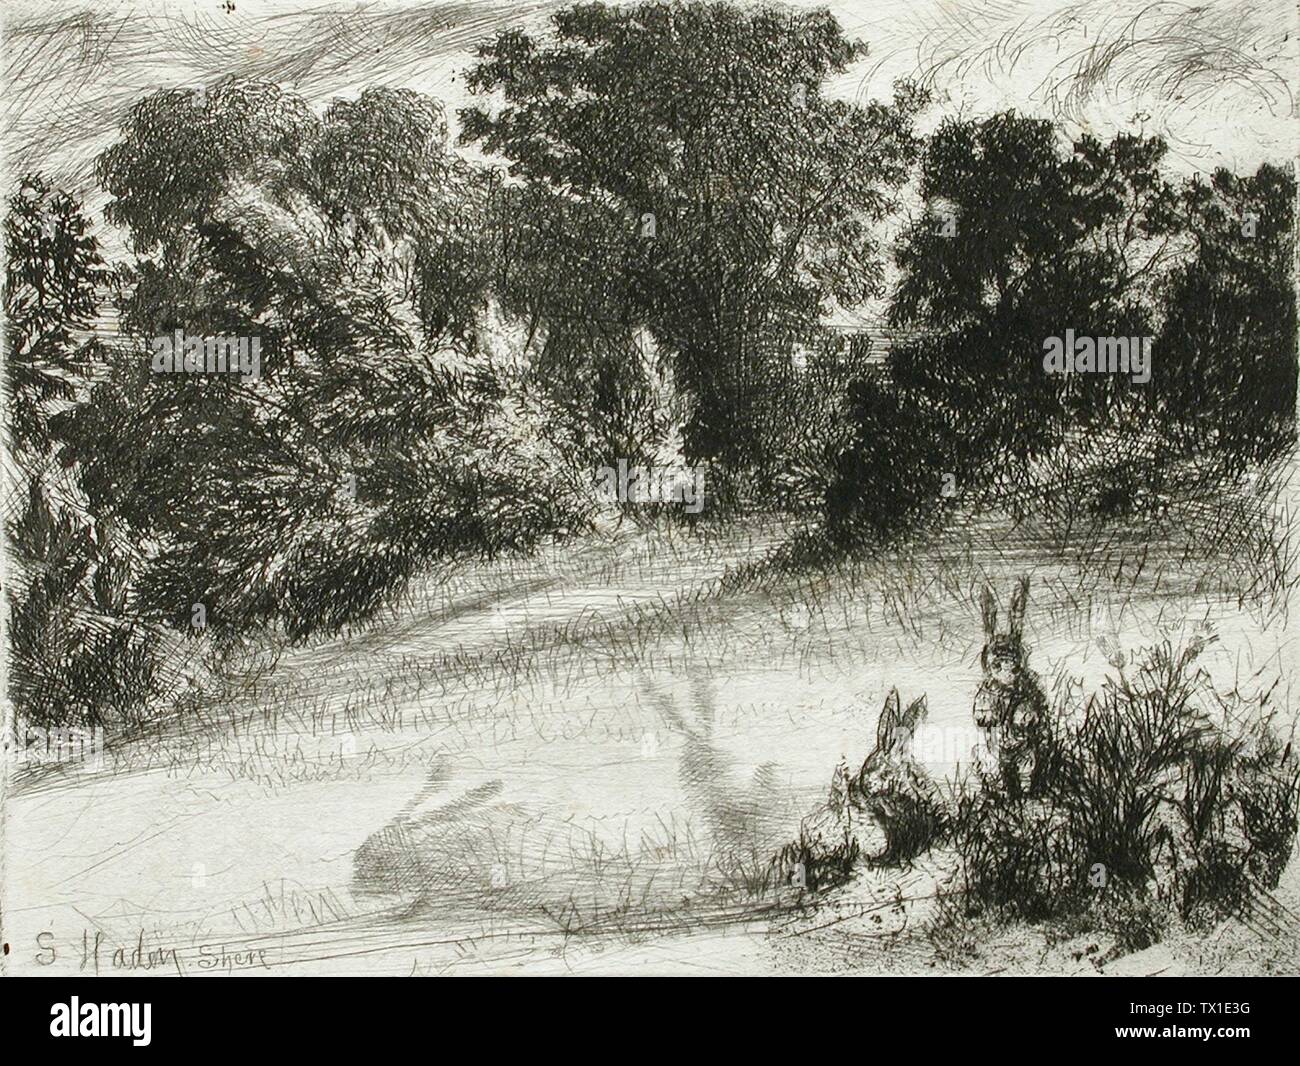 Combe Bottom;  England, 1860 Prints; etchings Etching and drypoint Format: 6 1/4 x 8 3/5 in. (15.88 x 21.84 cm); image: 4 1/2 x 5 7/8 in. (11.43 x 14.92 cm) Mr. and Mrs. Allan C. Balch Collection (M.45.3.528) Prints and Drawings; 1860date QS:P571,+1860-00-00T00:00:00Z/9; Stock Photo